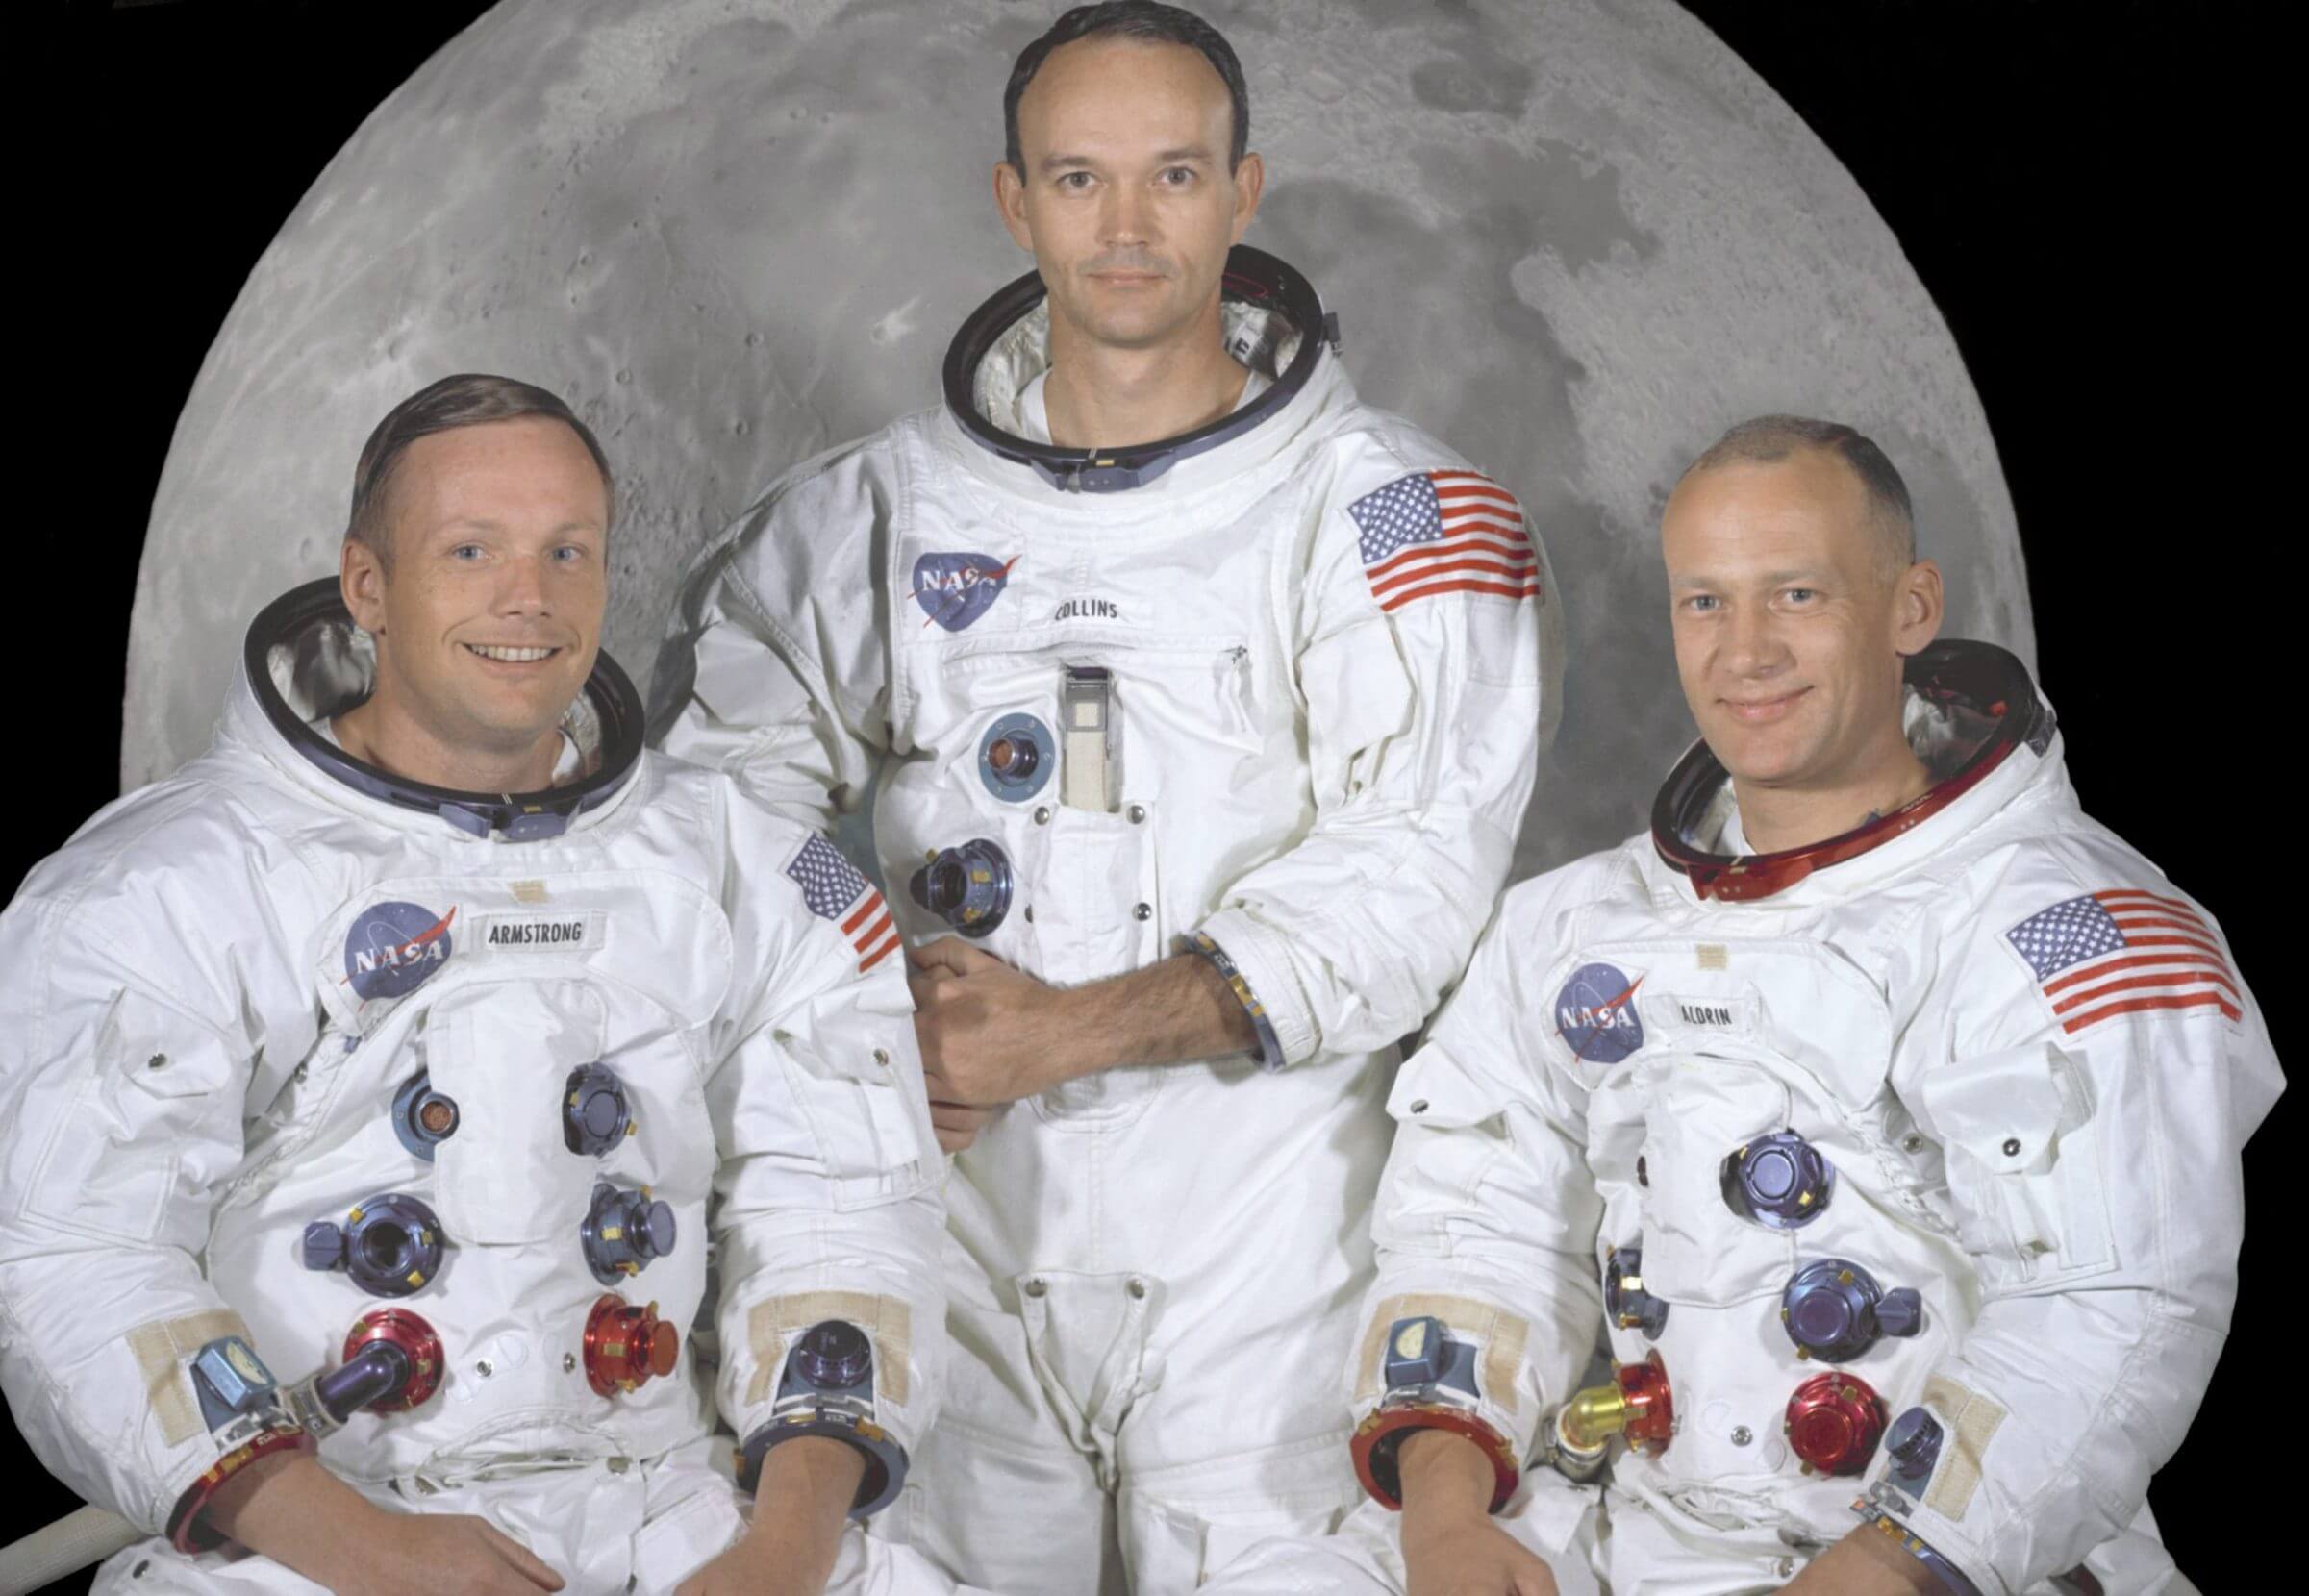 Portrait of the prime crew of the Apollo 11 lunar landing mission. From left to right they are: Commander, Neil A. Armstrong, Command Module Pilot, Michael Collins, and Lunar Module Pilot, Edwin E. Aldrin Jr. On July 20th 1969 at 4:18 PM, EDT the Lunar Module 